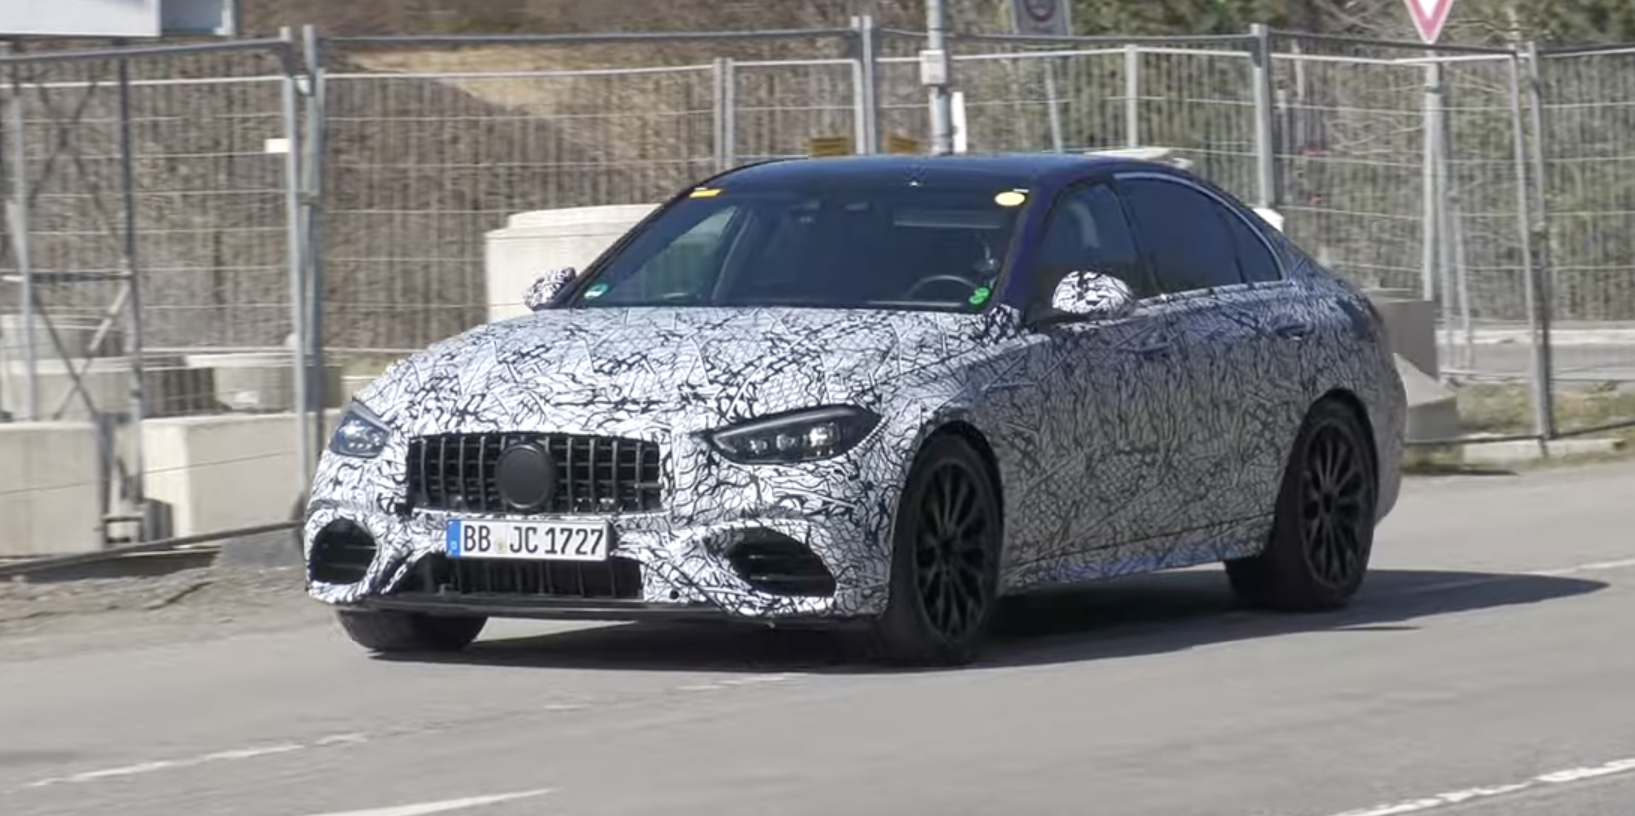 The New Mercedes-AMG C63 Will Get 660 HP and 553 LB-FT From a Hybrid Turbo Four-Cylinder